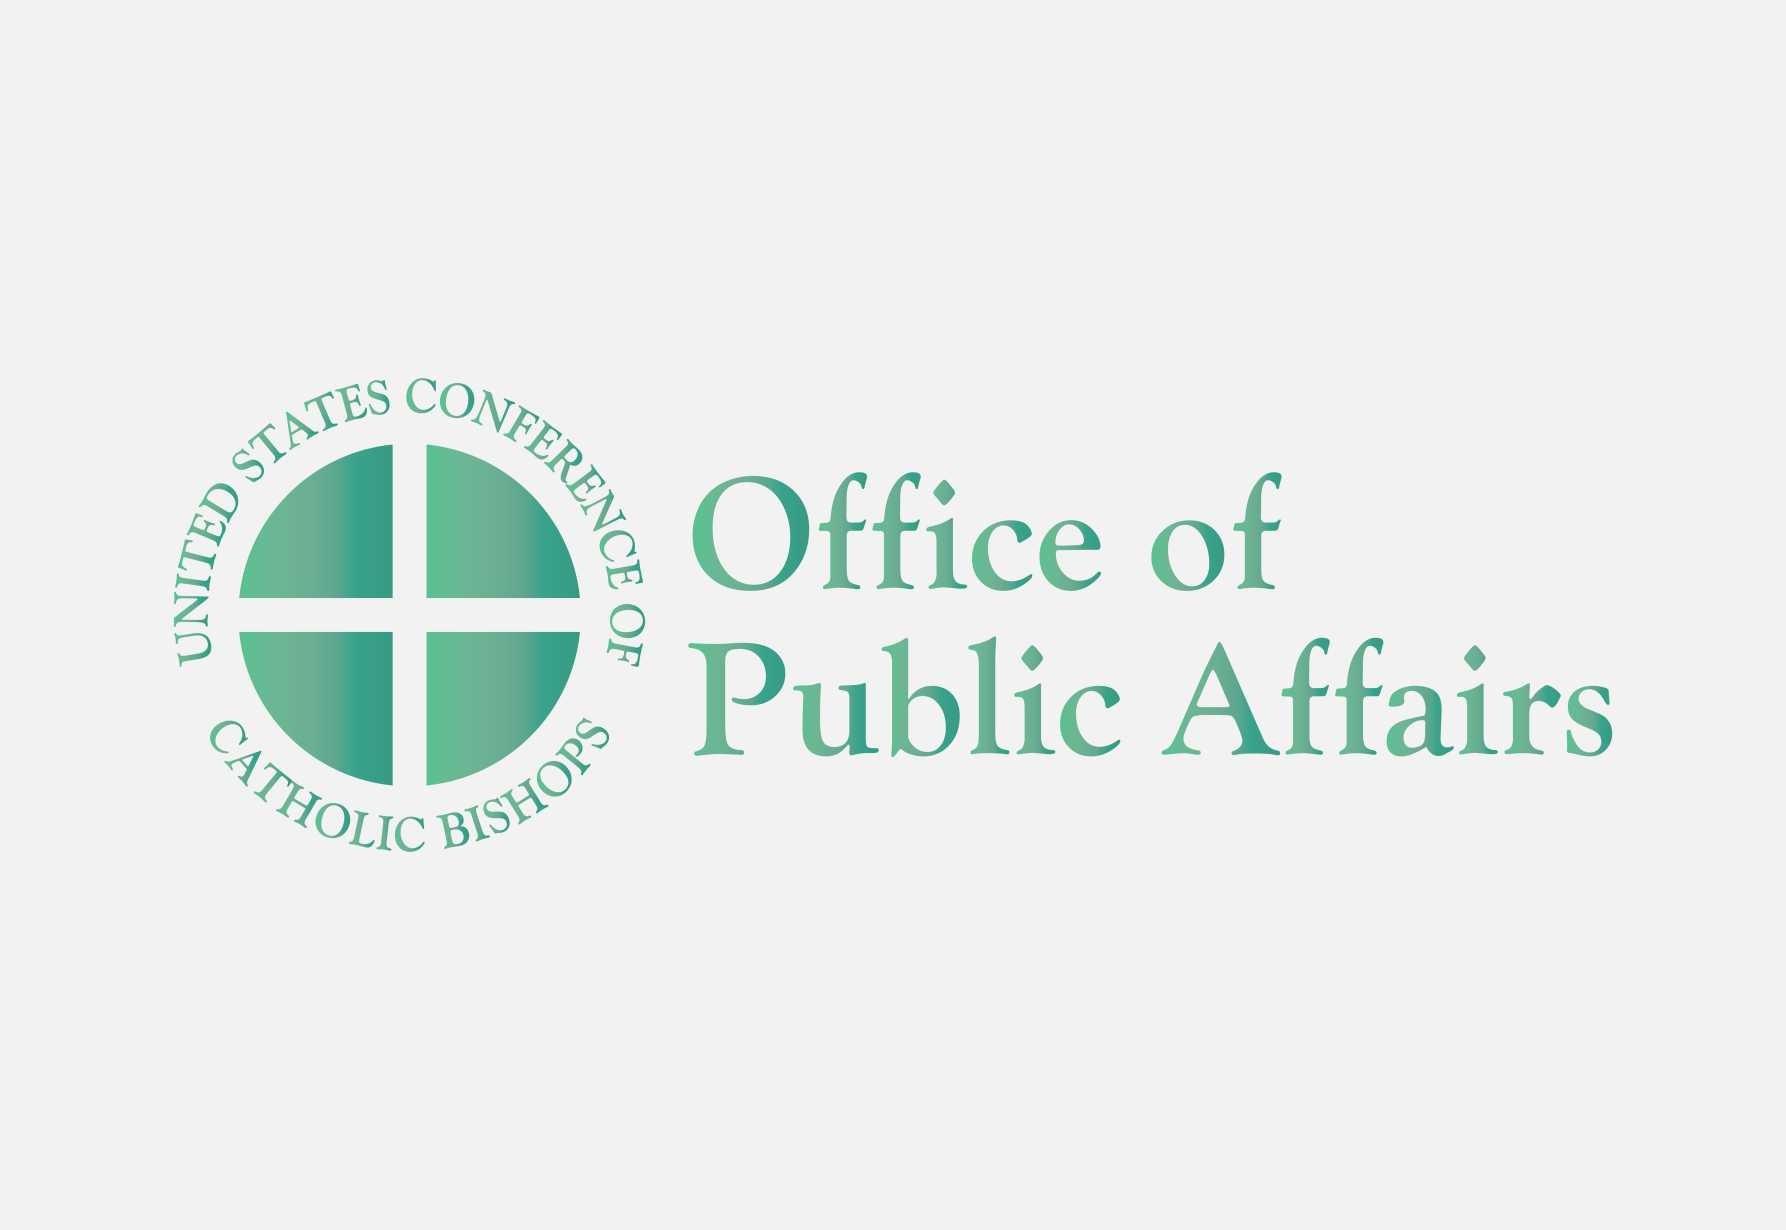 Annual Survey Provides Insight into the State of the Permanent Diaconate in the Church